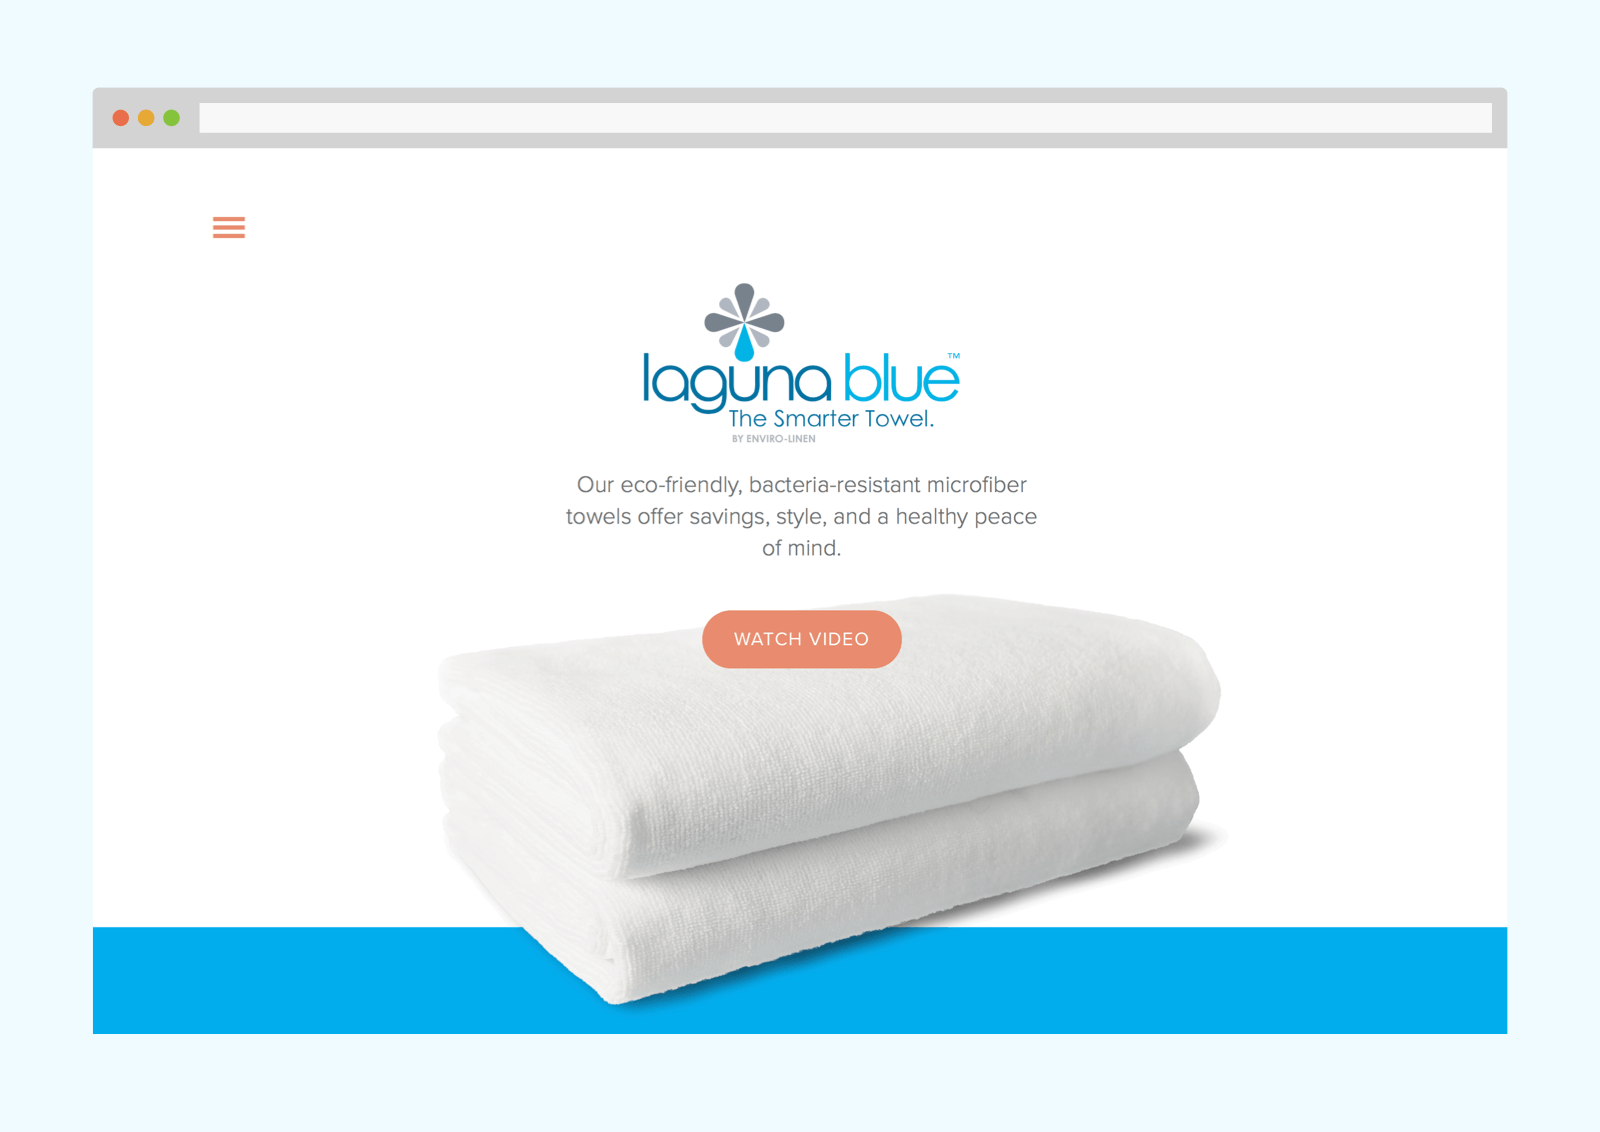 Homepage features stark design with large, cut out photo of towel